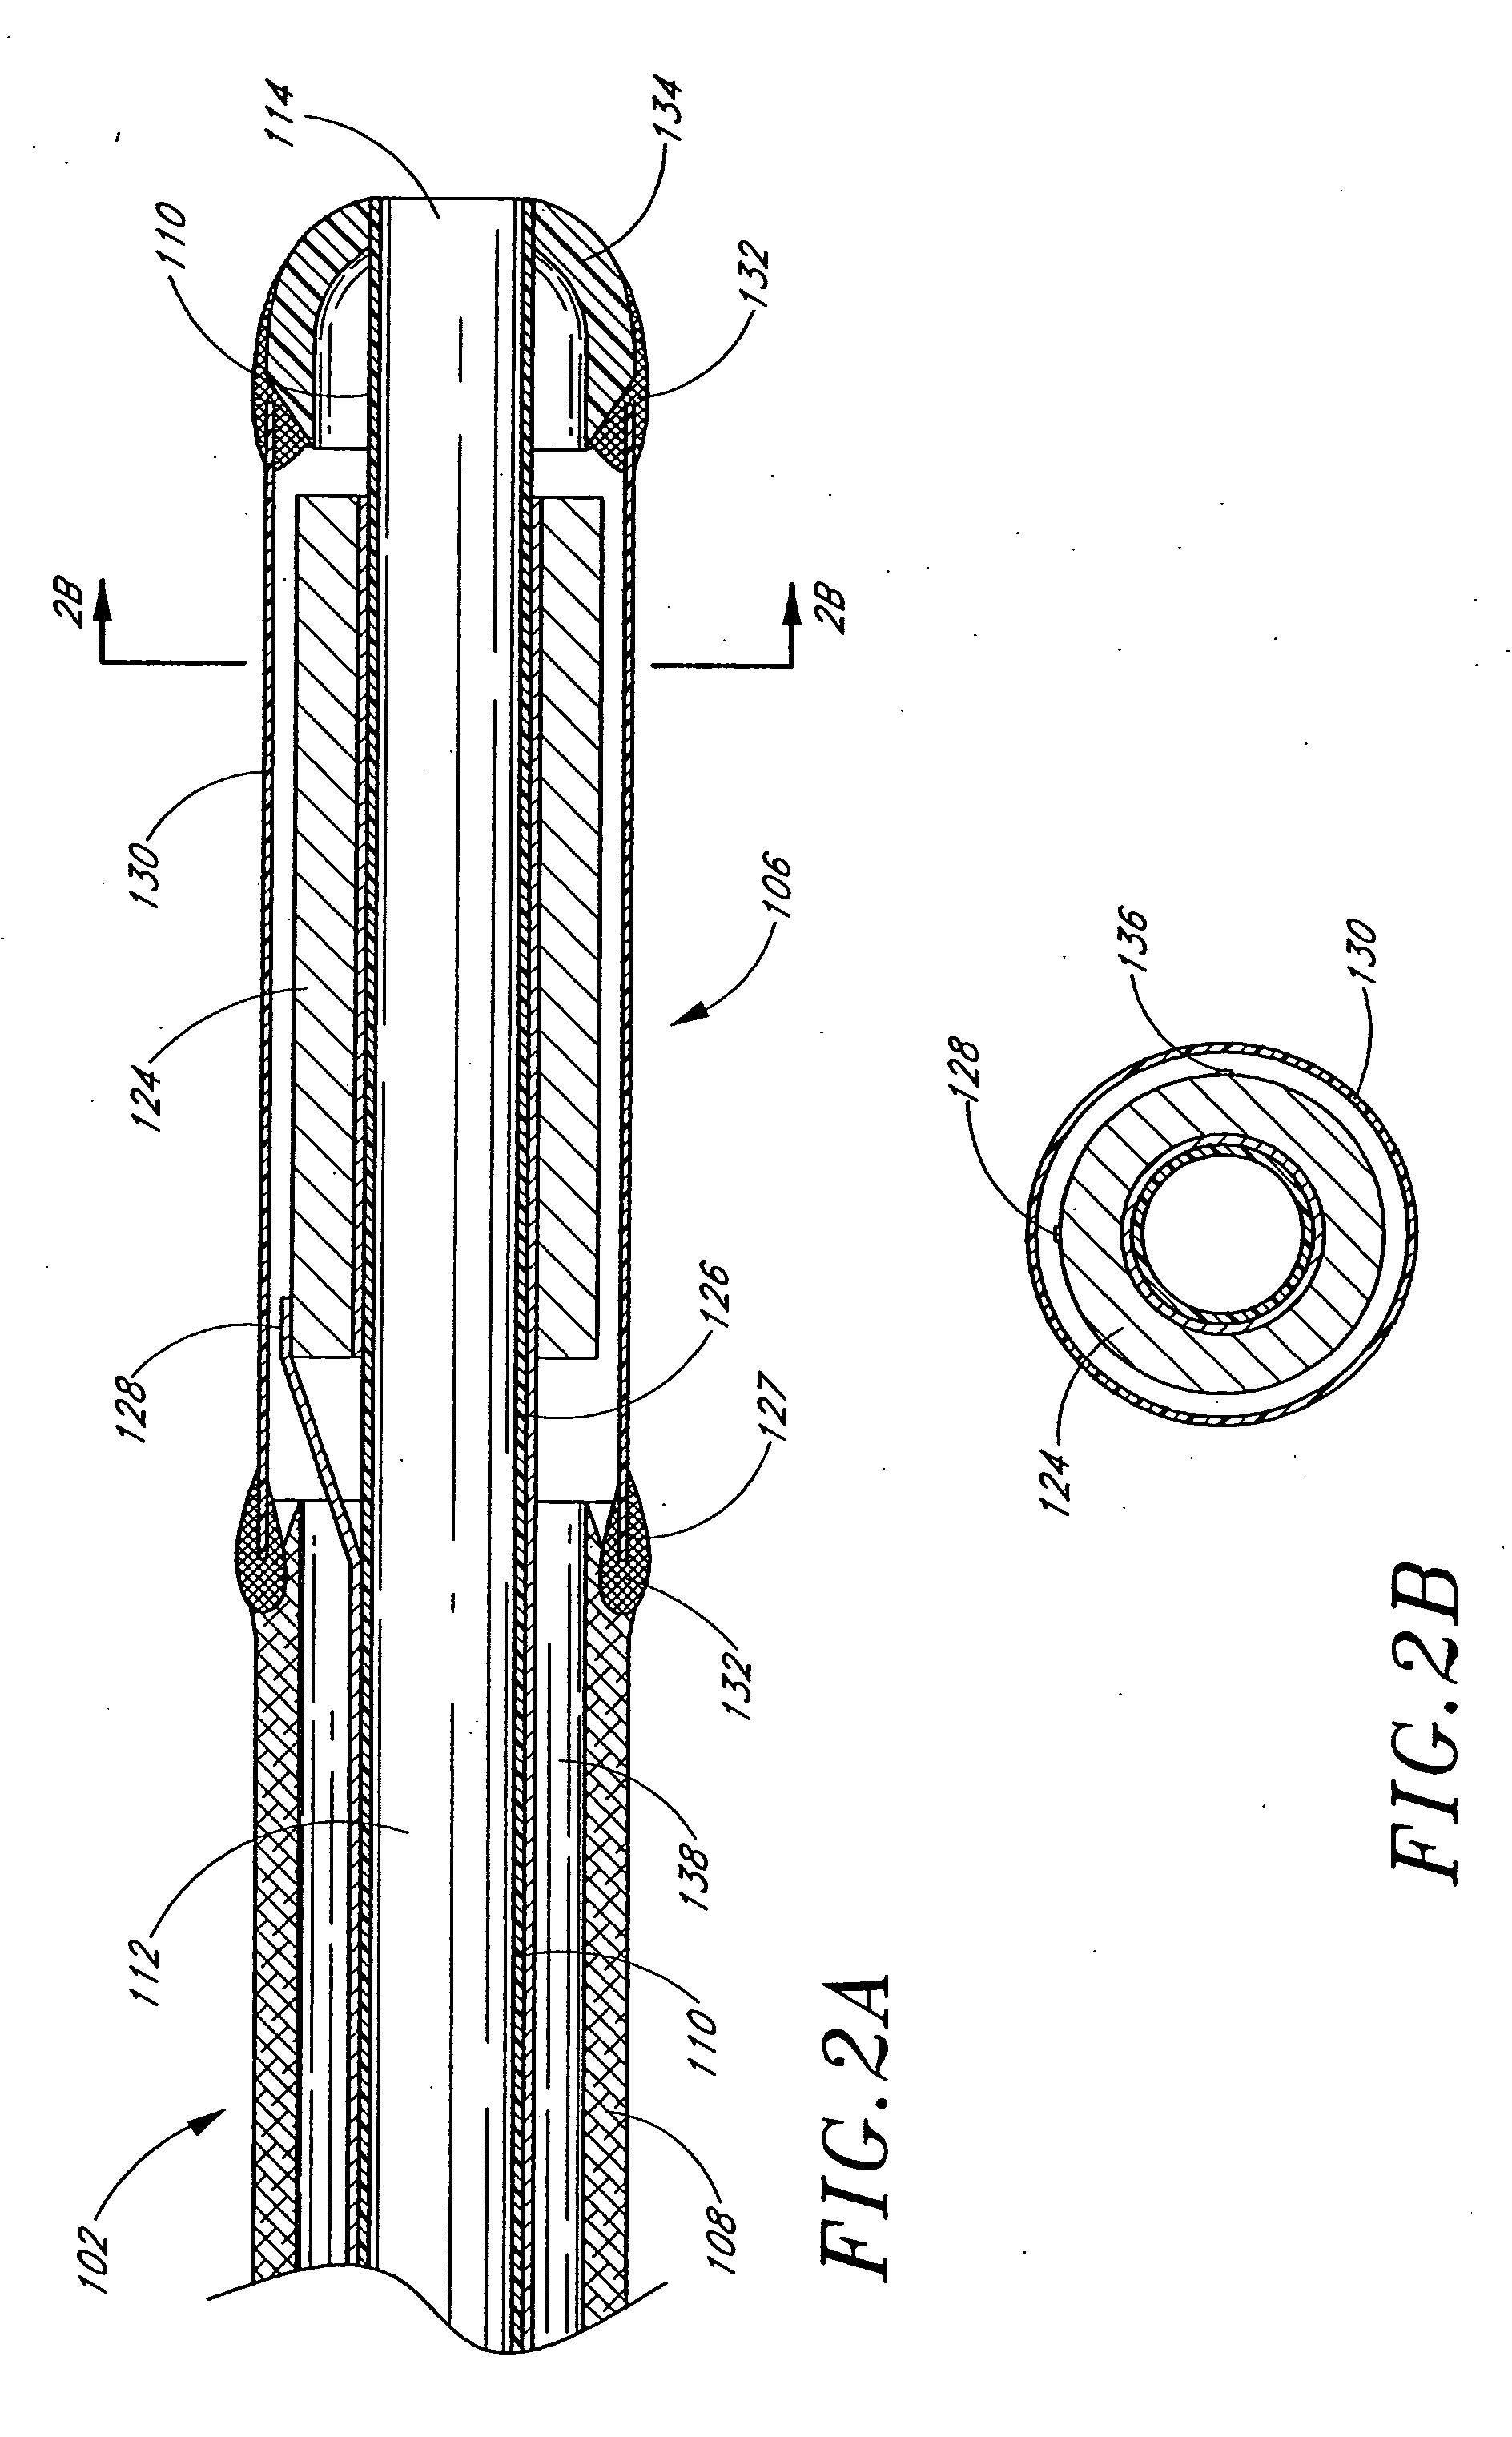 Ultrasound catheter with embedded conductors